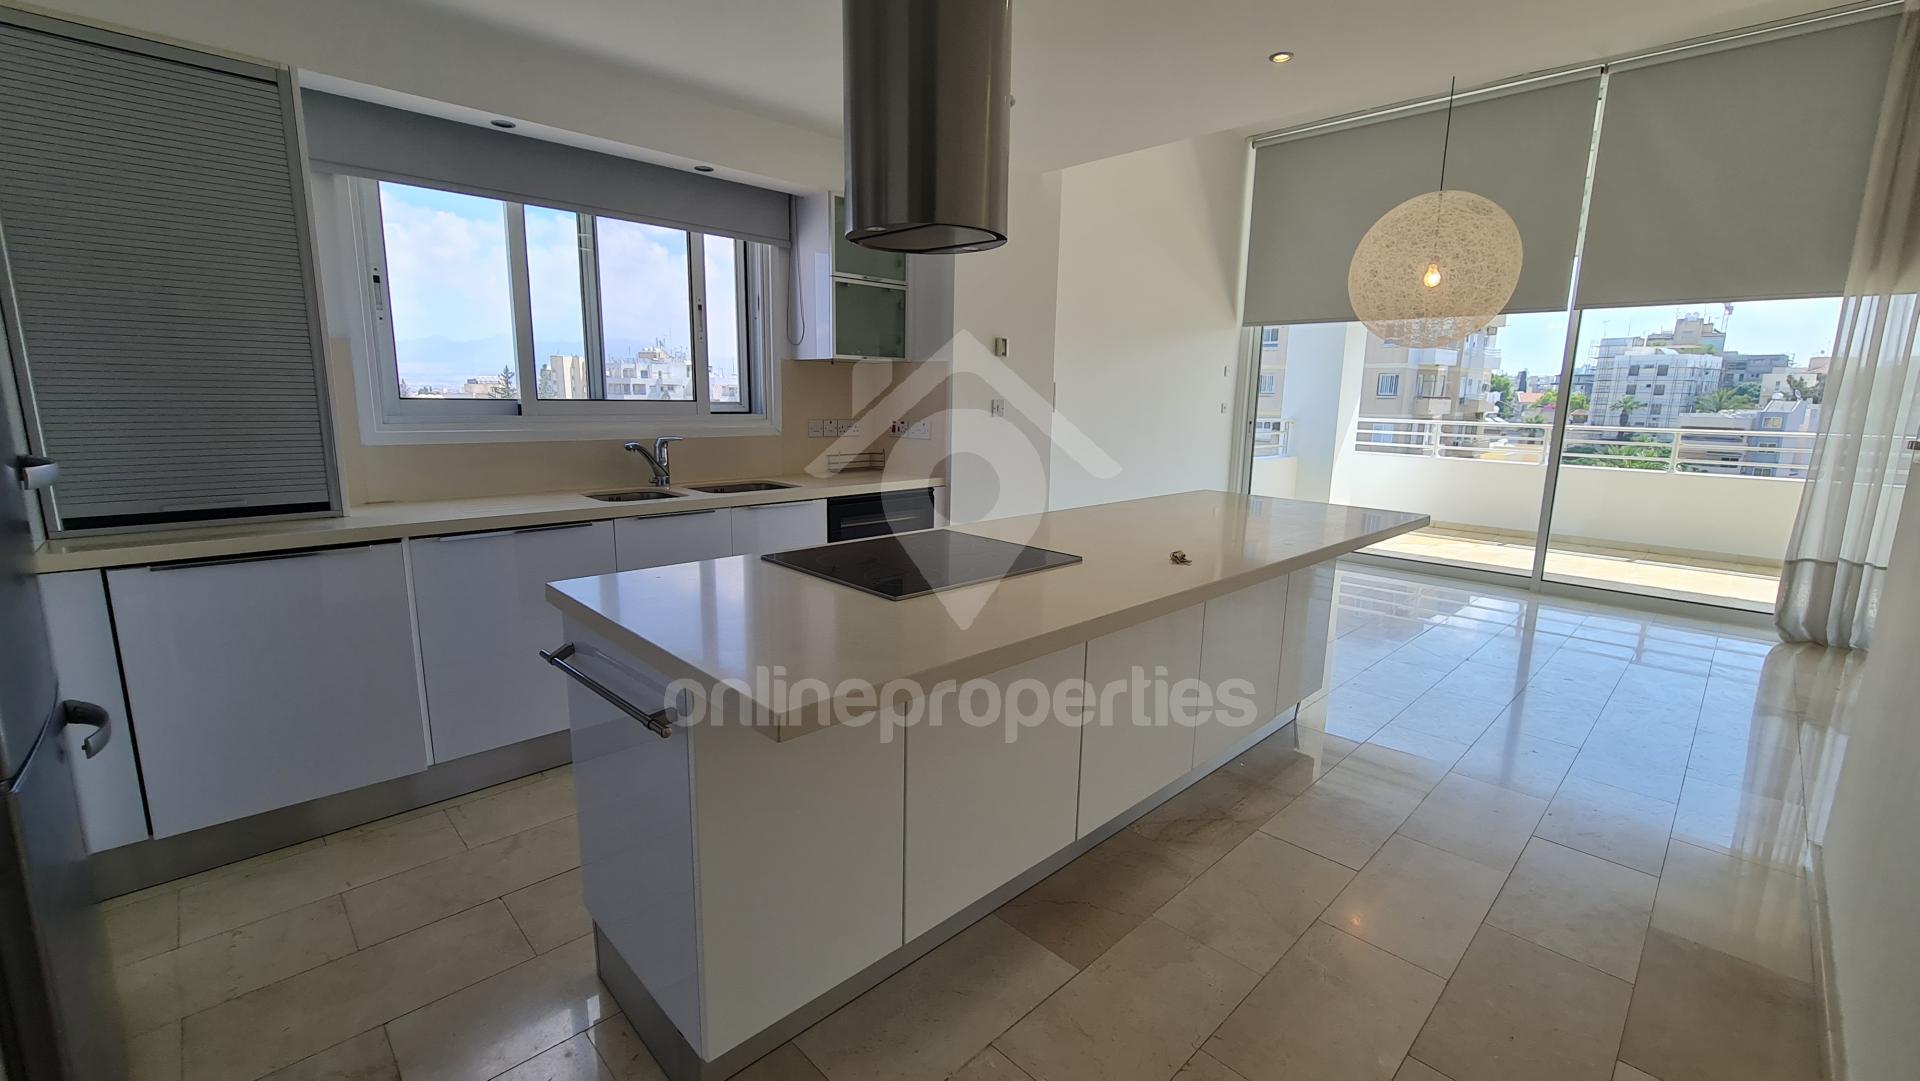 Furnished Super spacious 2 Bed Penthouse with Private Roof Terrace